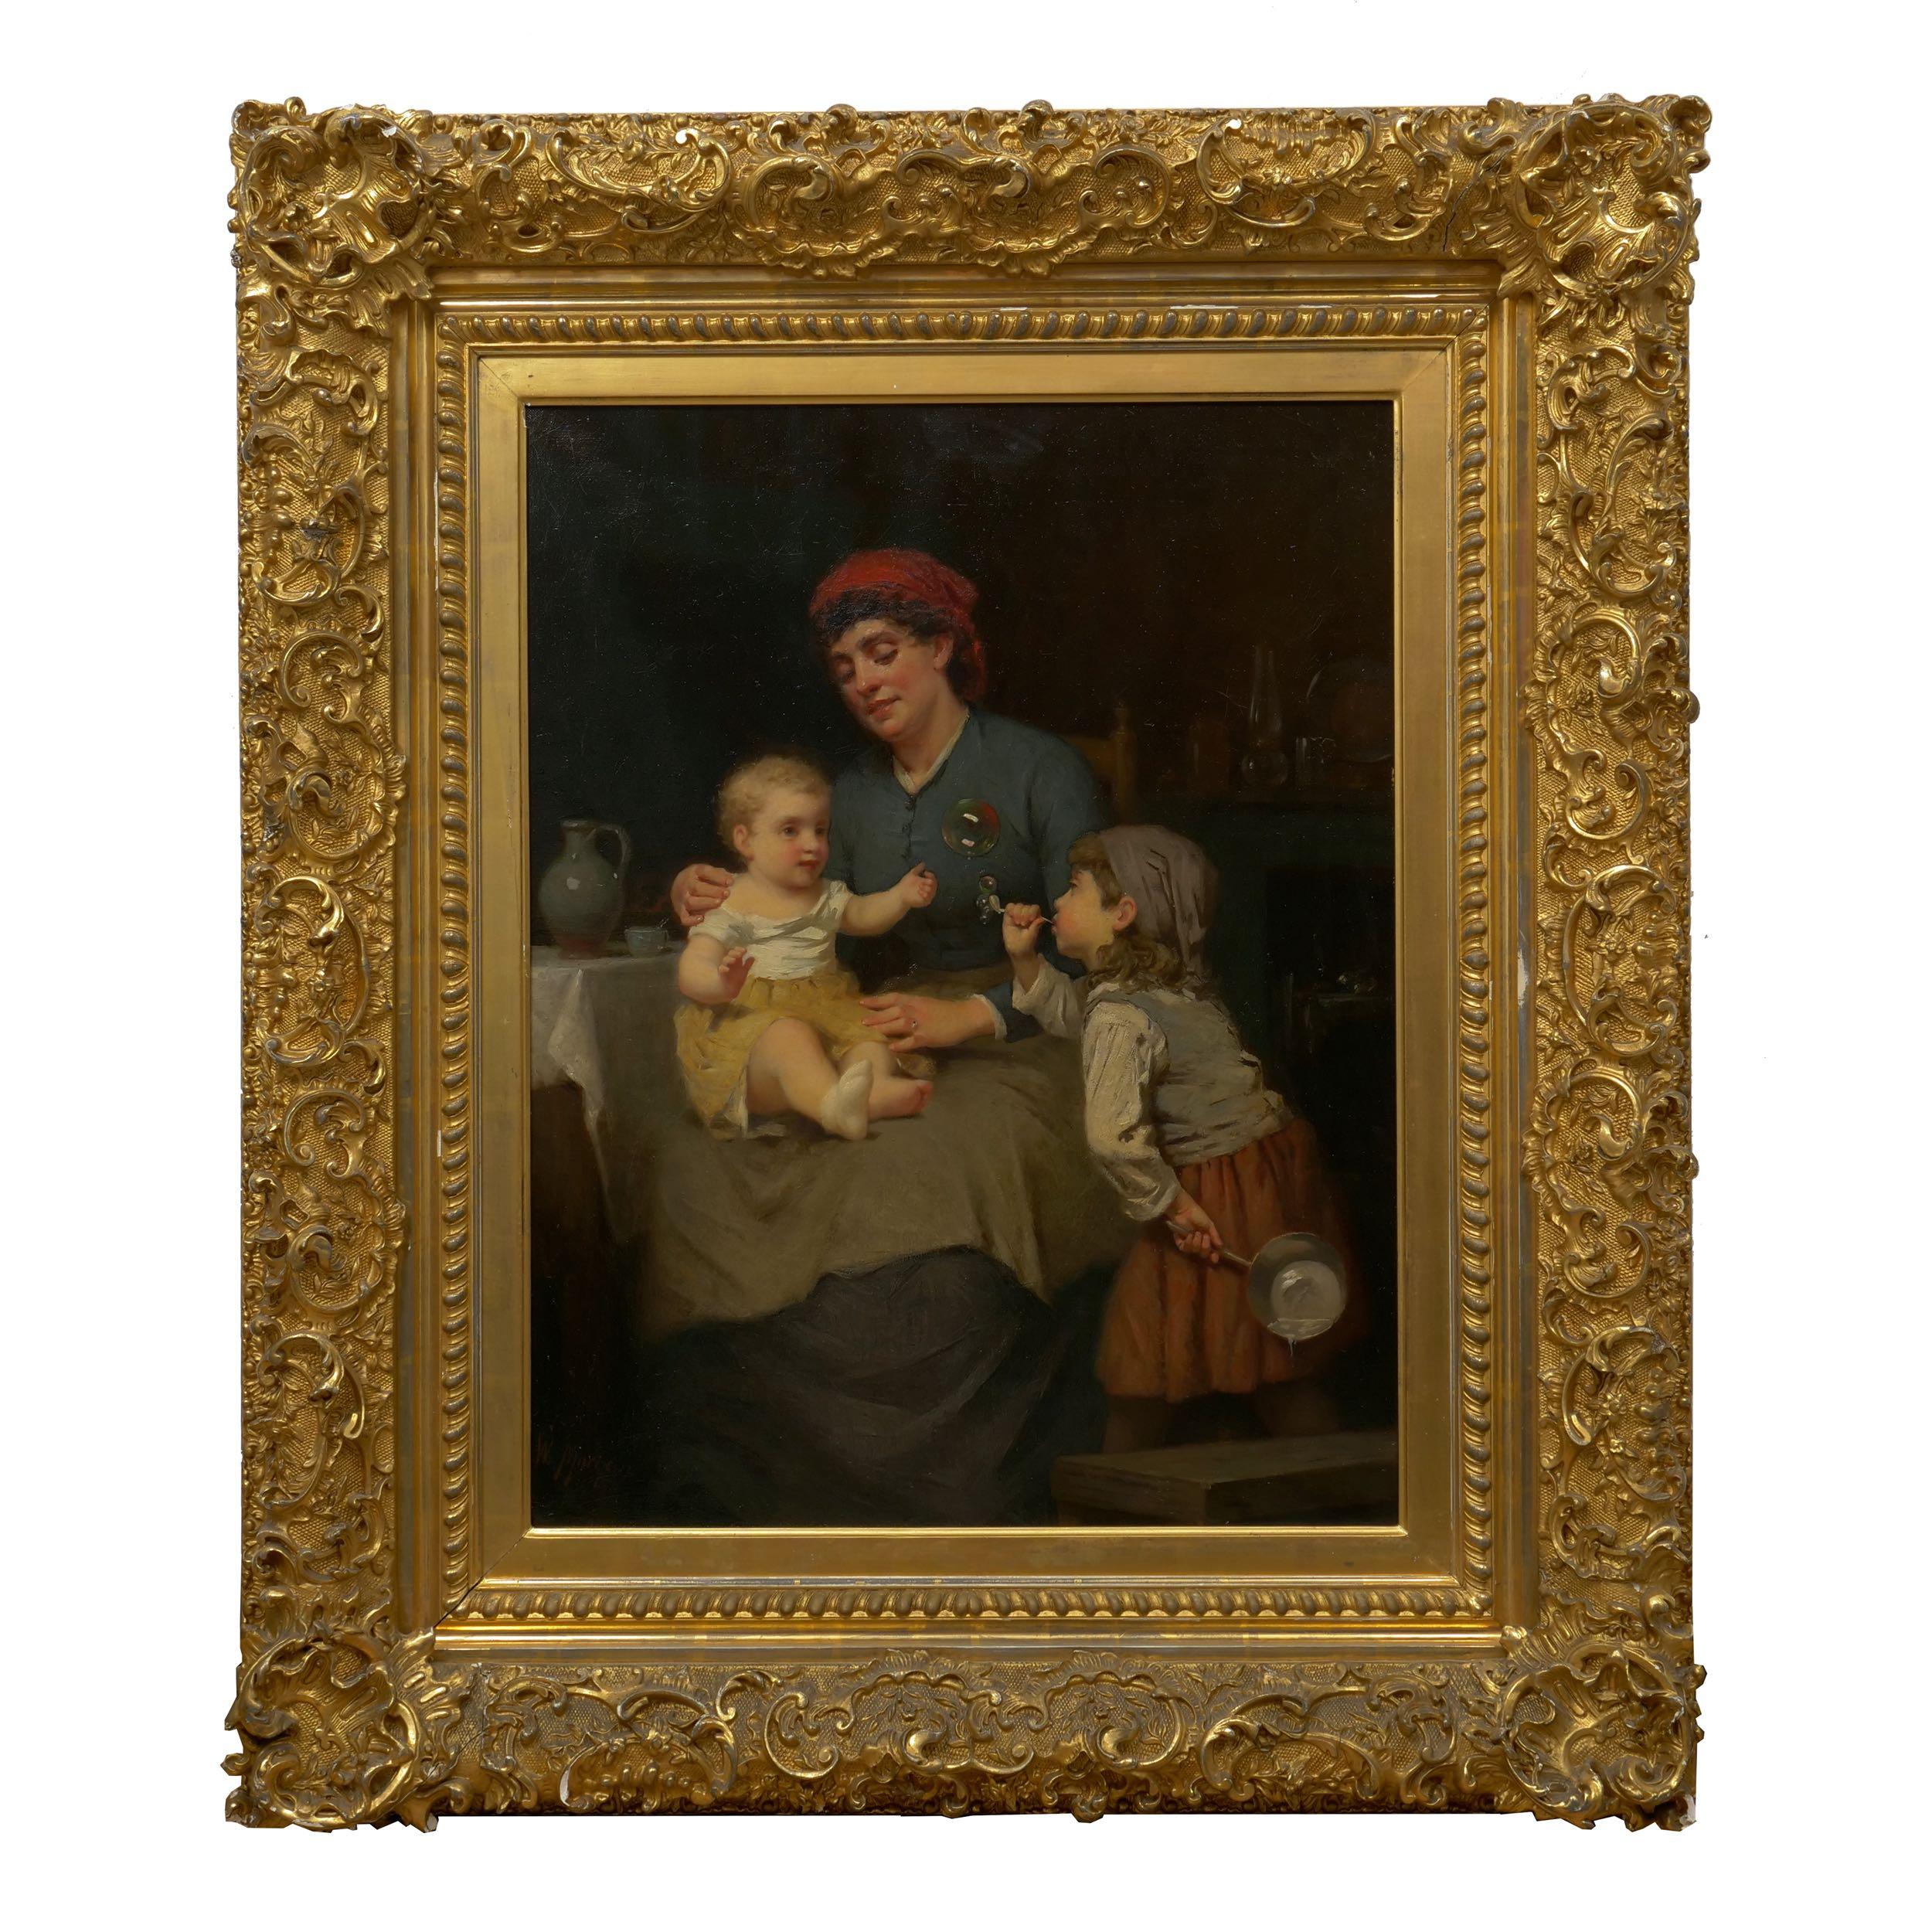 A heartwarming interior scene, it cheerily captures a young girl blowing bubbles from her pipe to entertain her infant sister while neglecting the pot of water that pours out on the bench behind her under the tolerant bemused eye of her seated